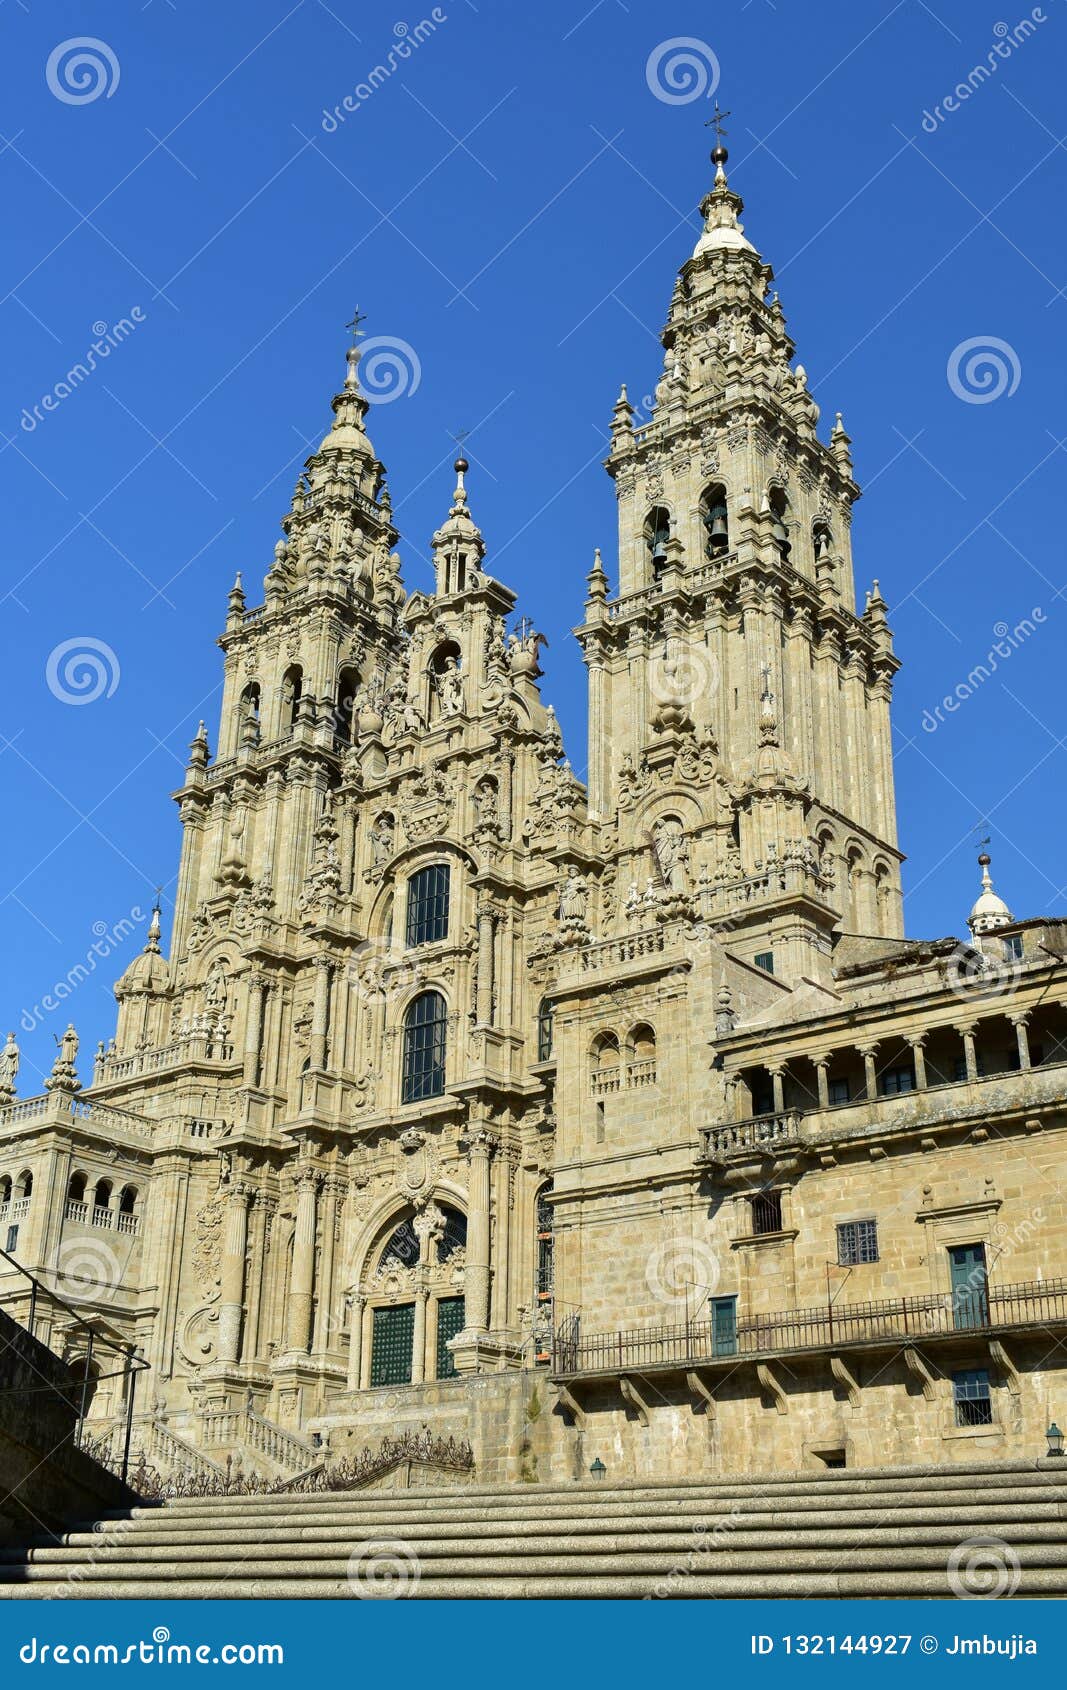 cathedral: side view from stairs. santiago de compostela, obradoiro square. spain. sunny day, clean stone, blue sky.